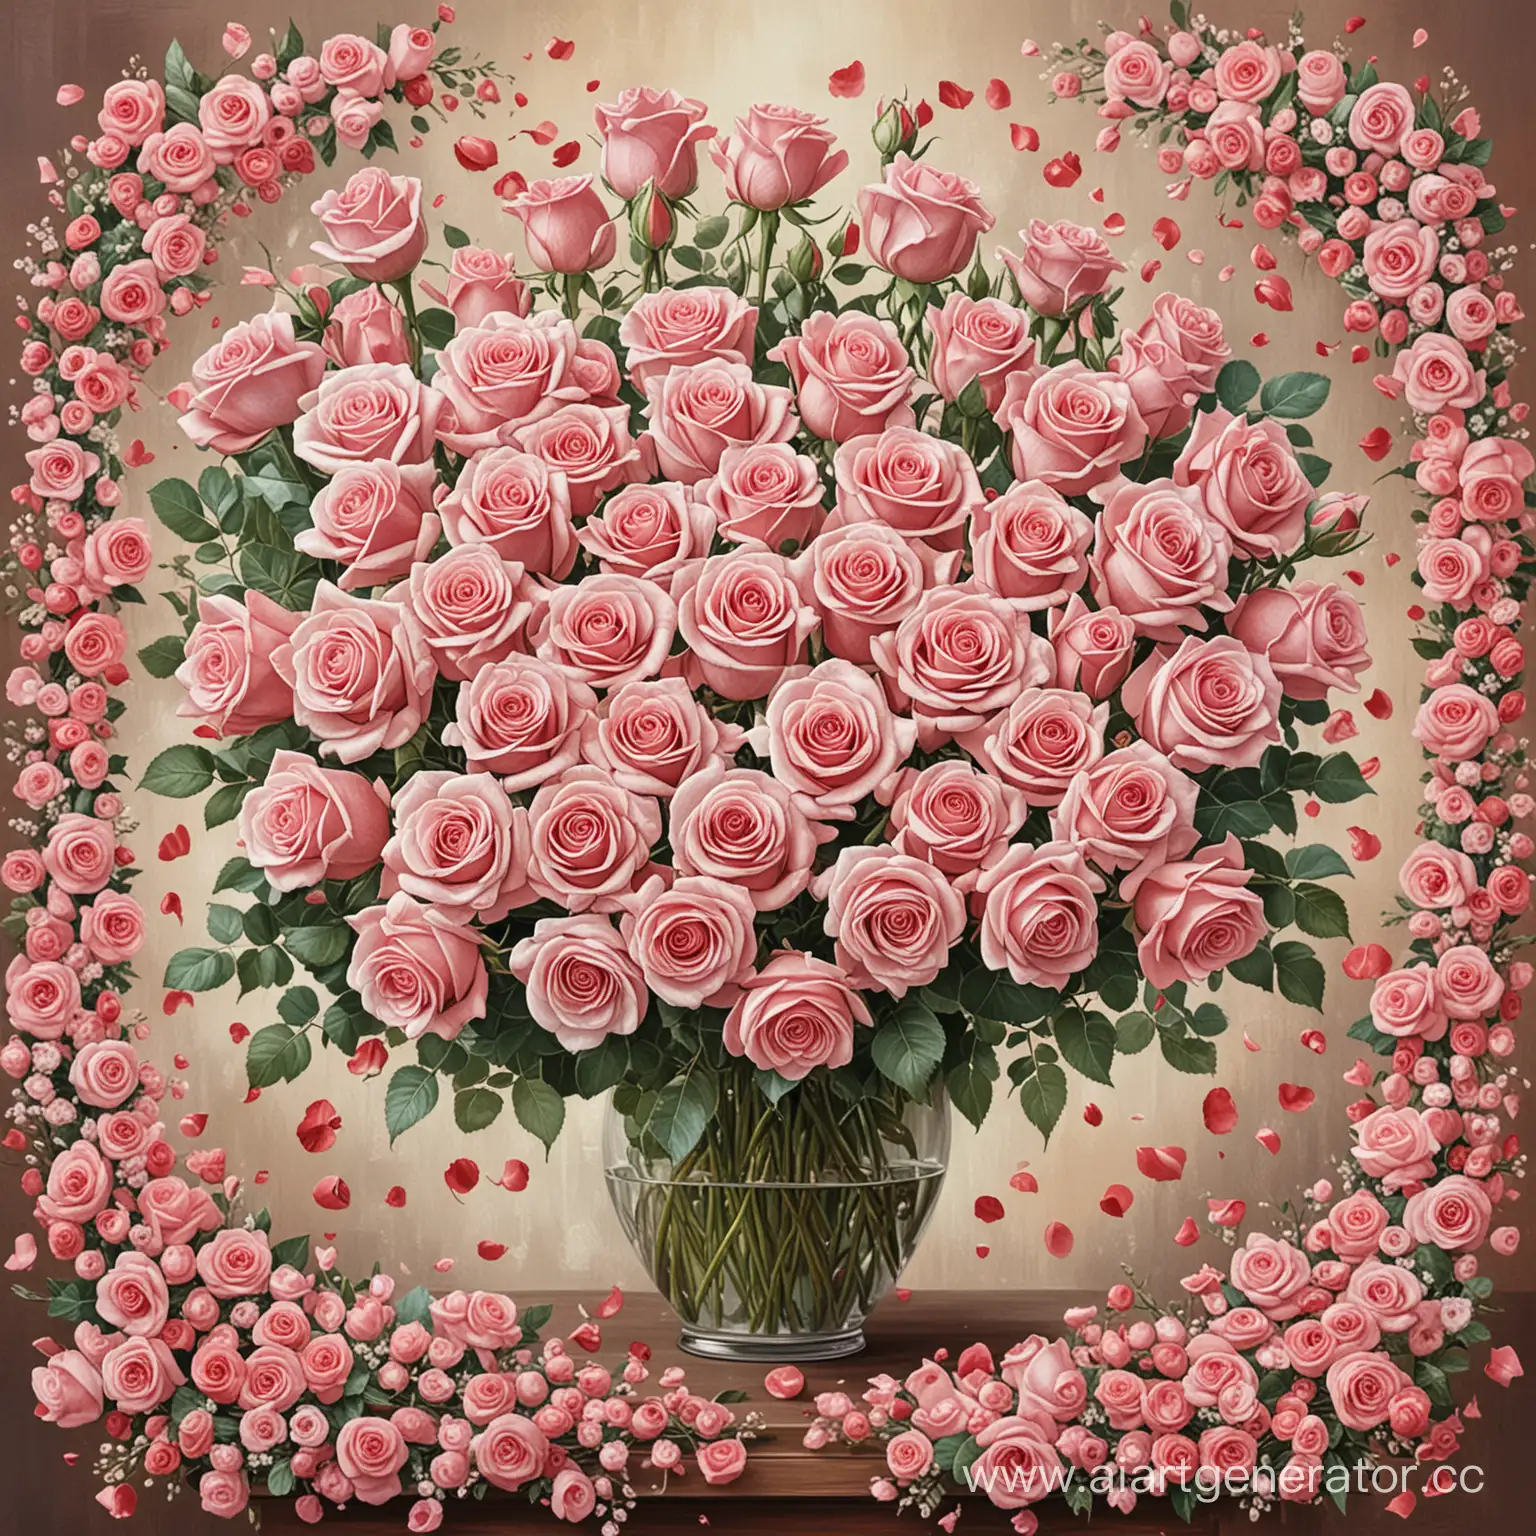 Husband-Surprises-Wife-with-1488-Roses-Bouquet-Romantic-Gesture-of-Love-and-Devotion